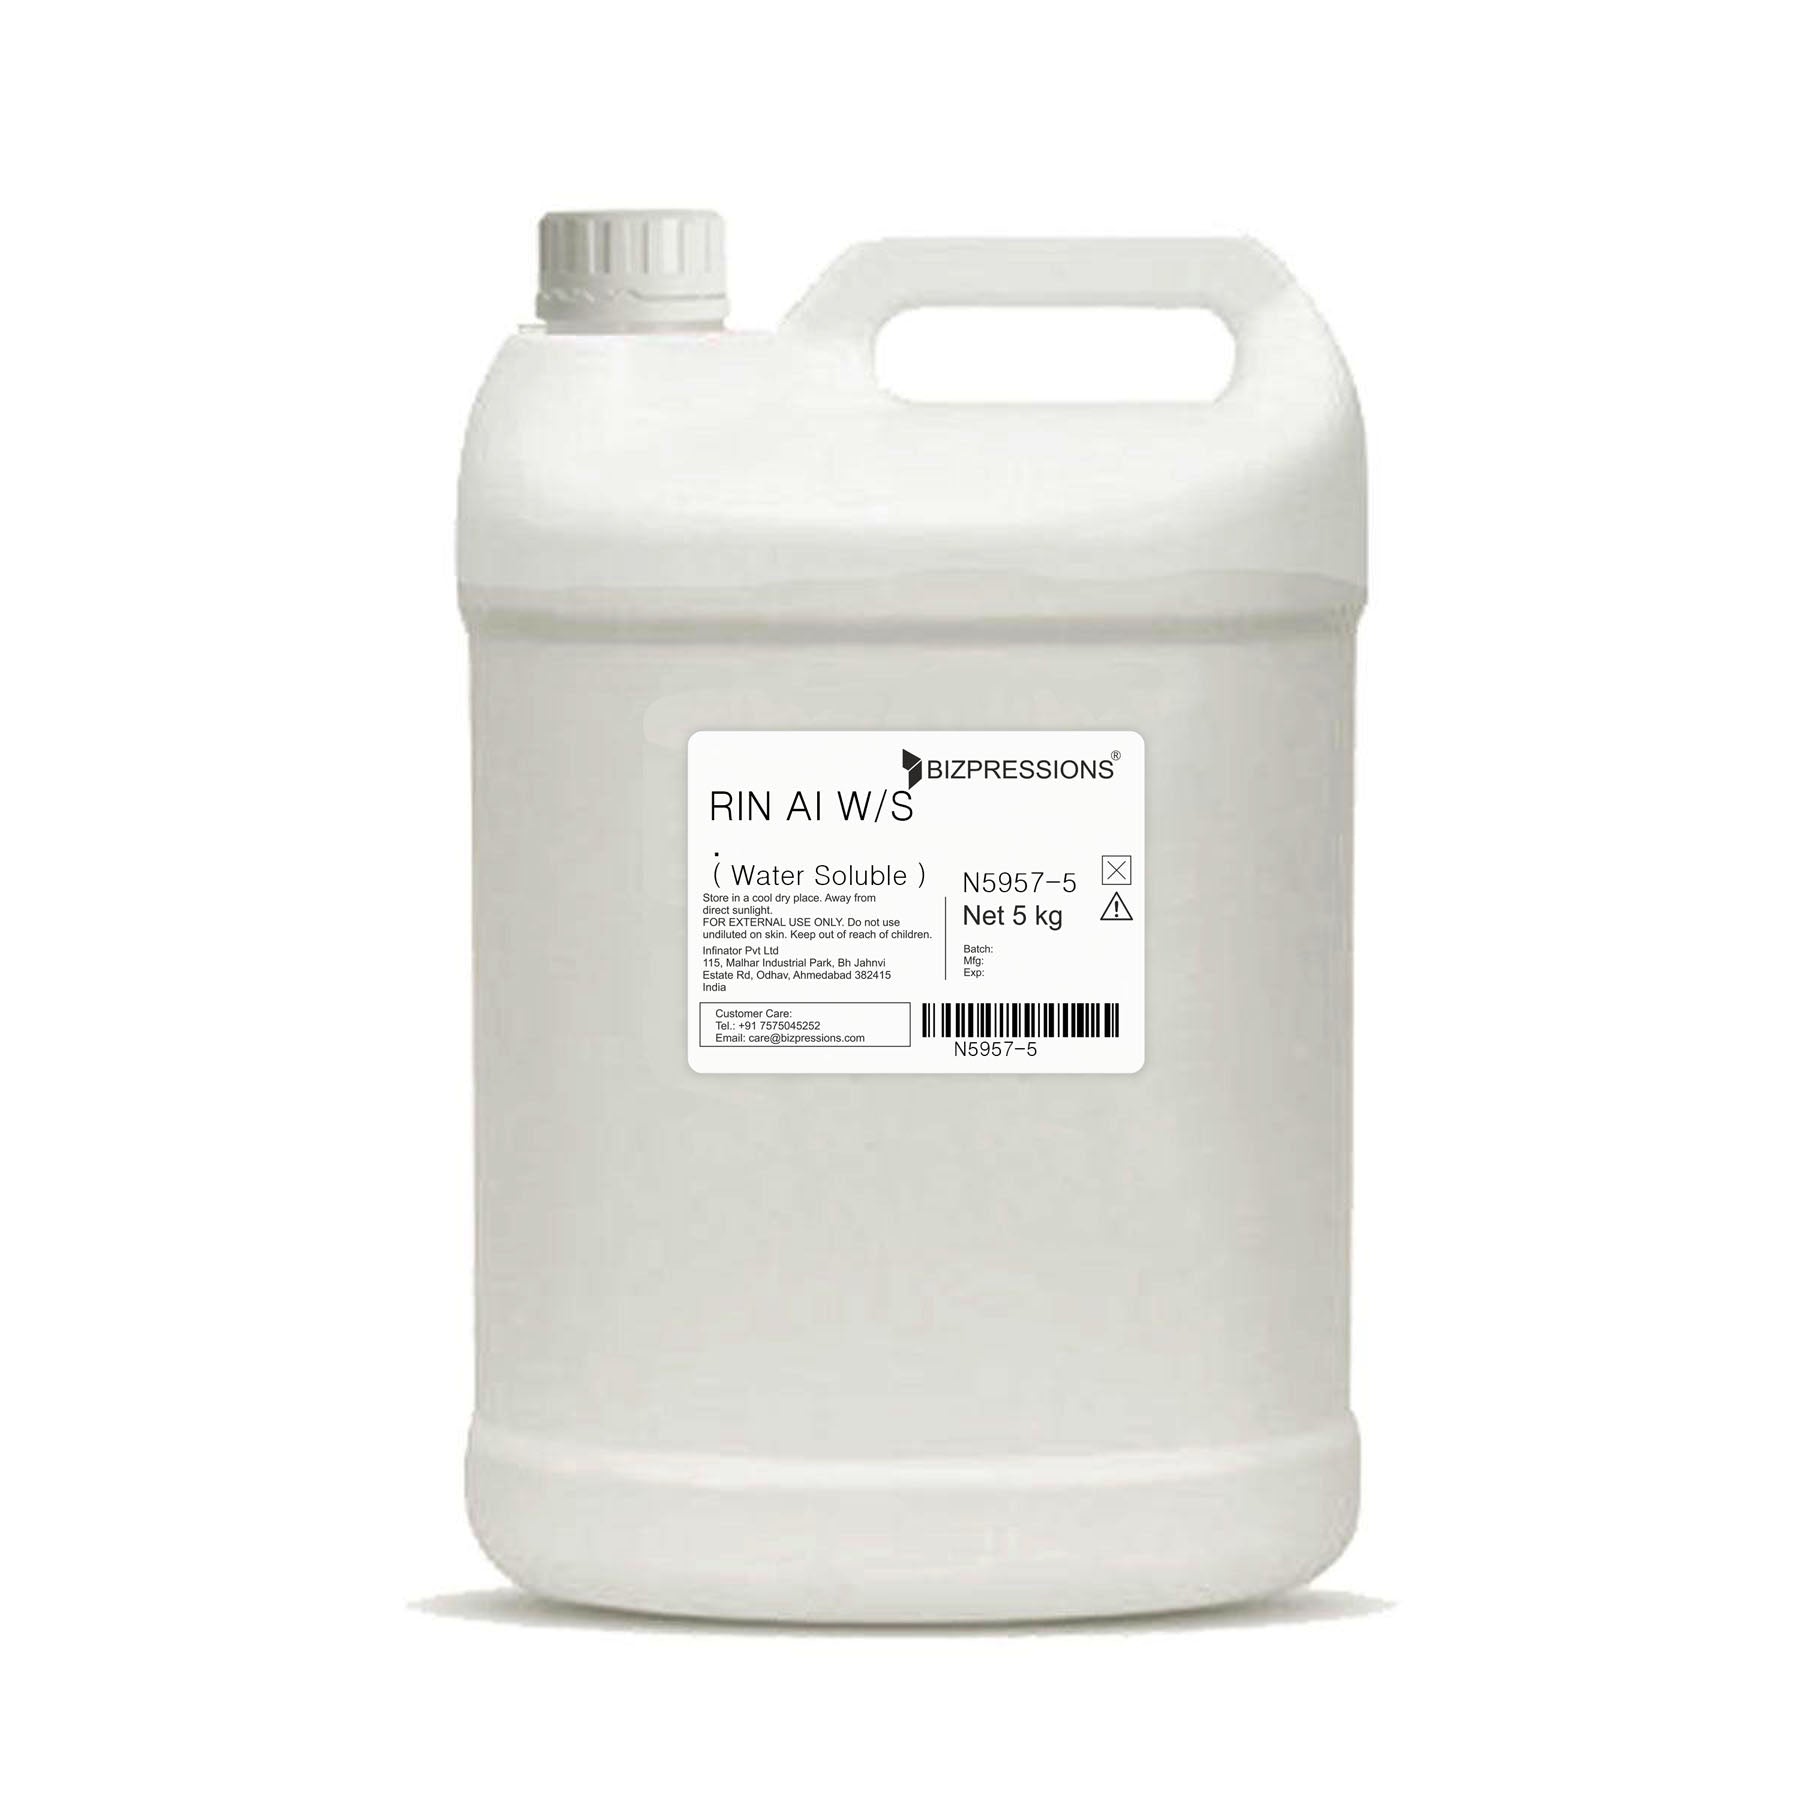 RIN AI W/S - Fragrance ( Water Soluble ) - 5 kg